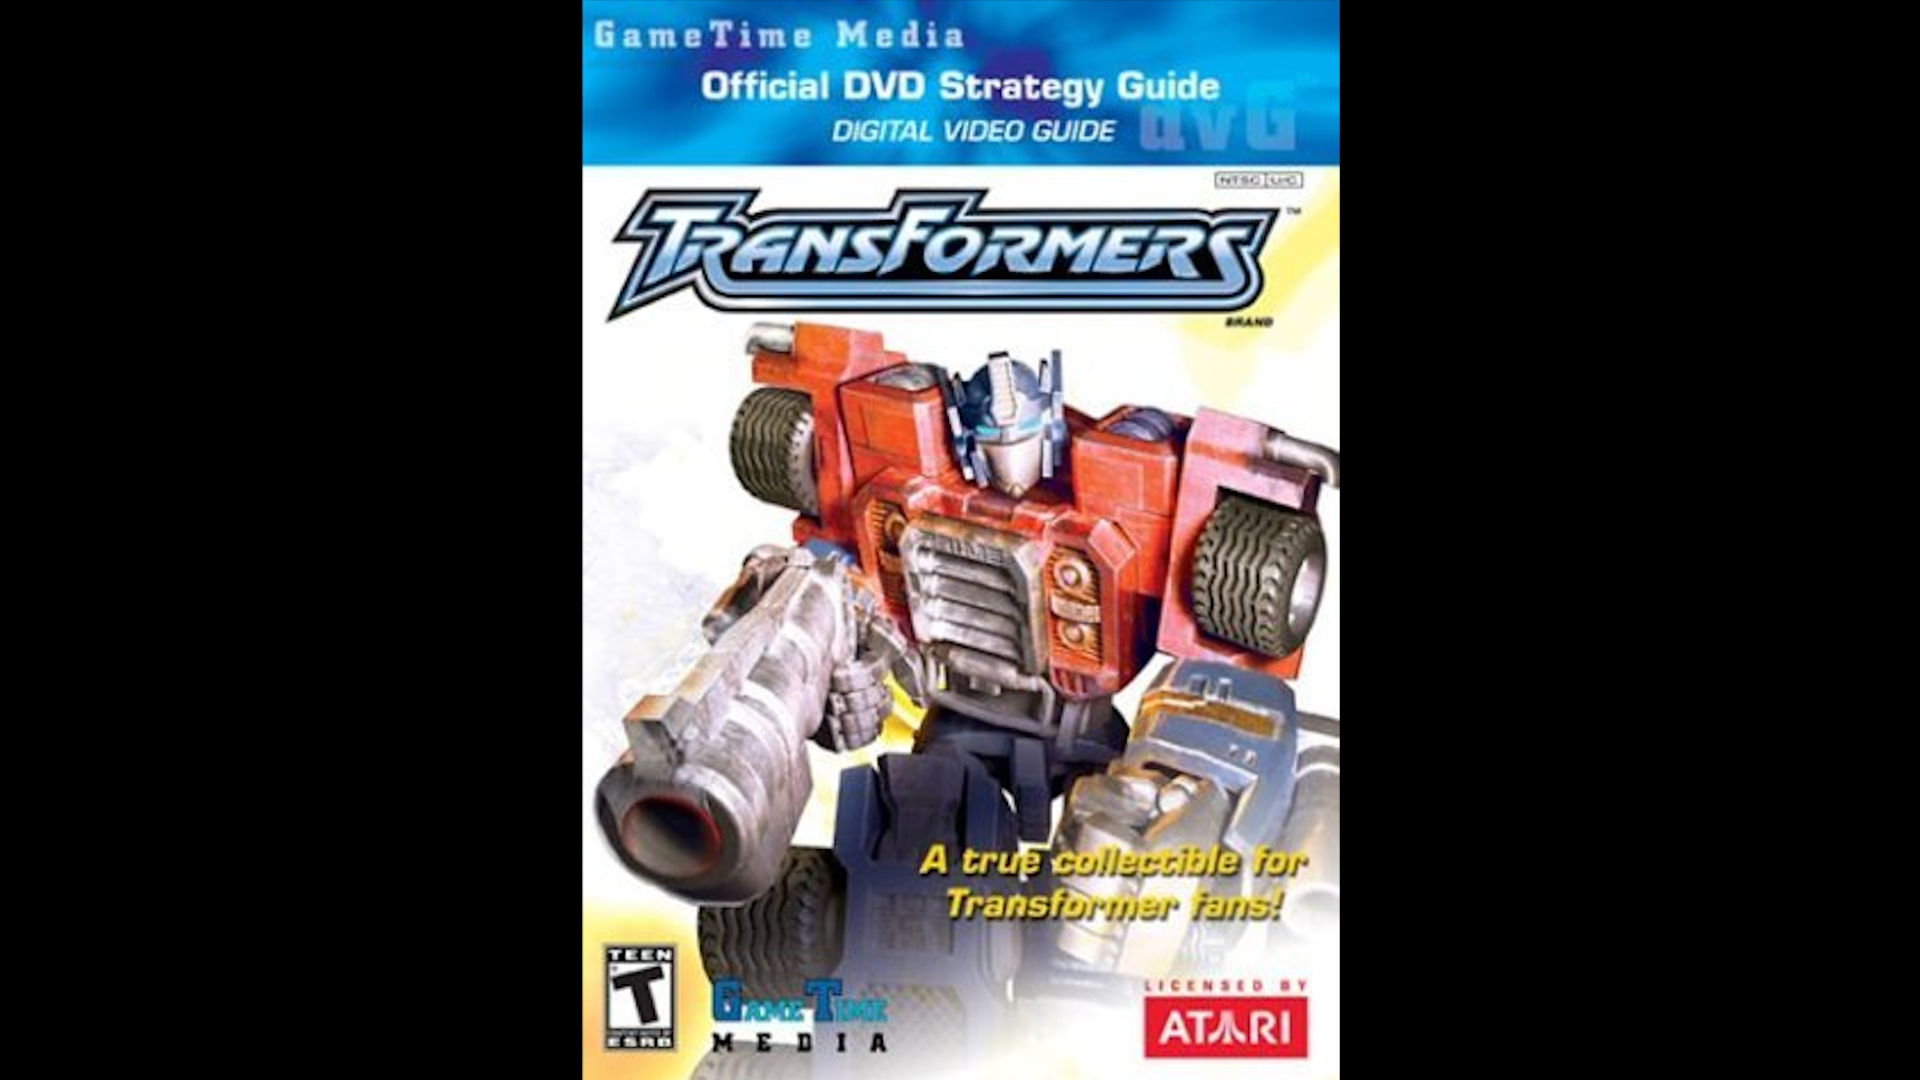 “"A true collectable for Transformer fans!" Just added th...